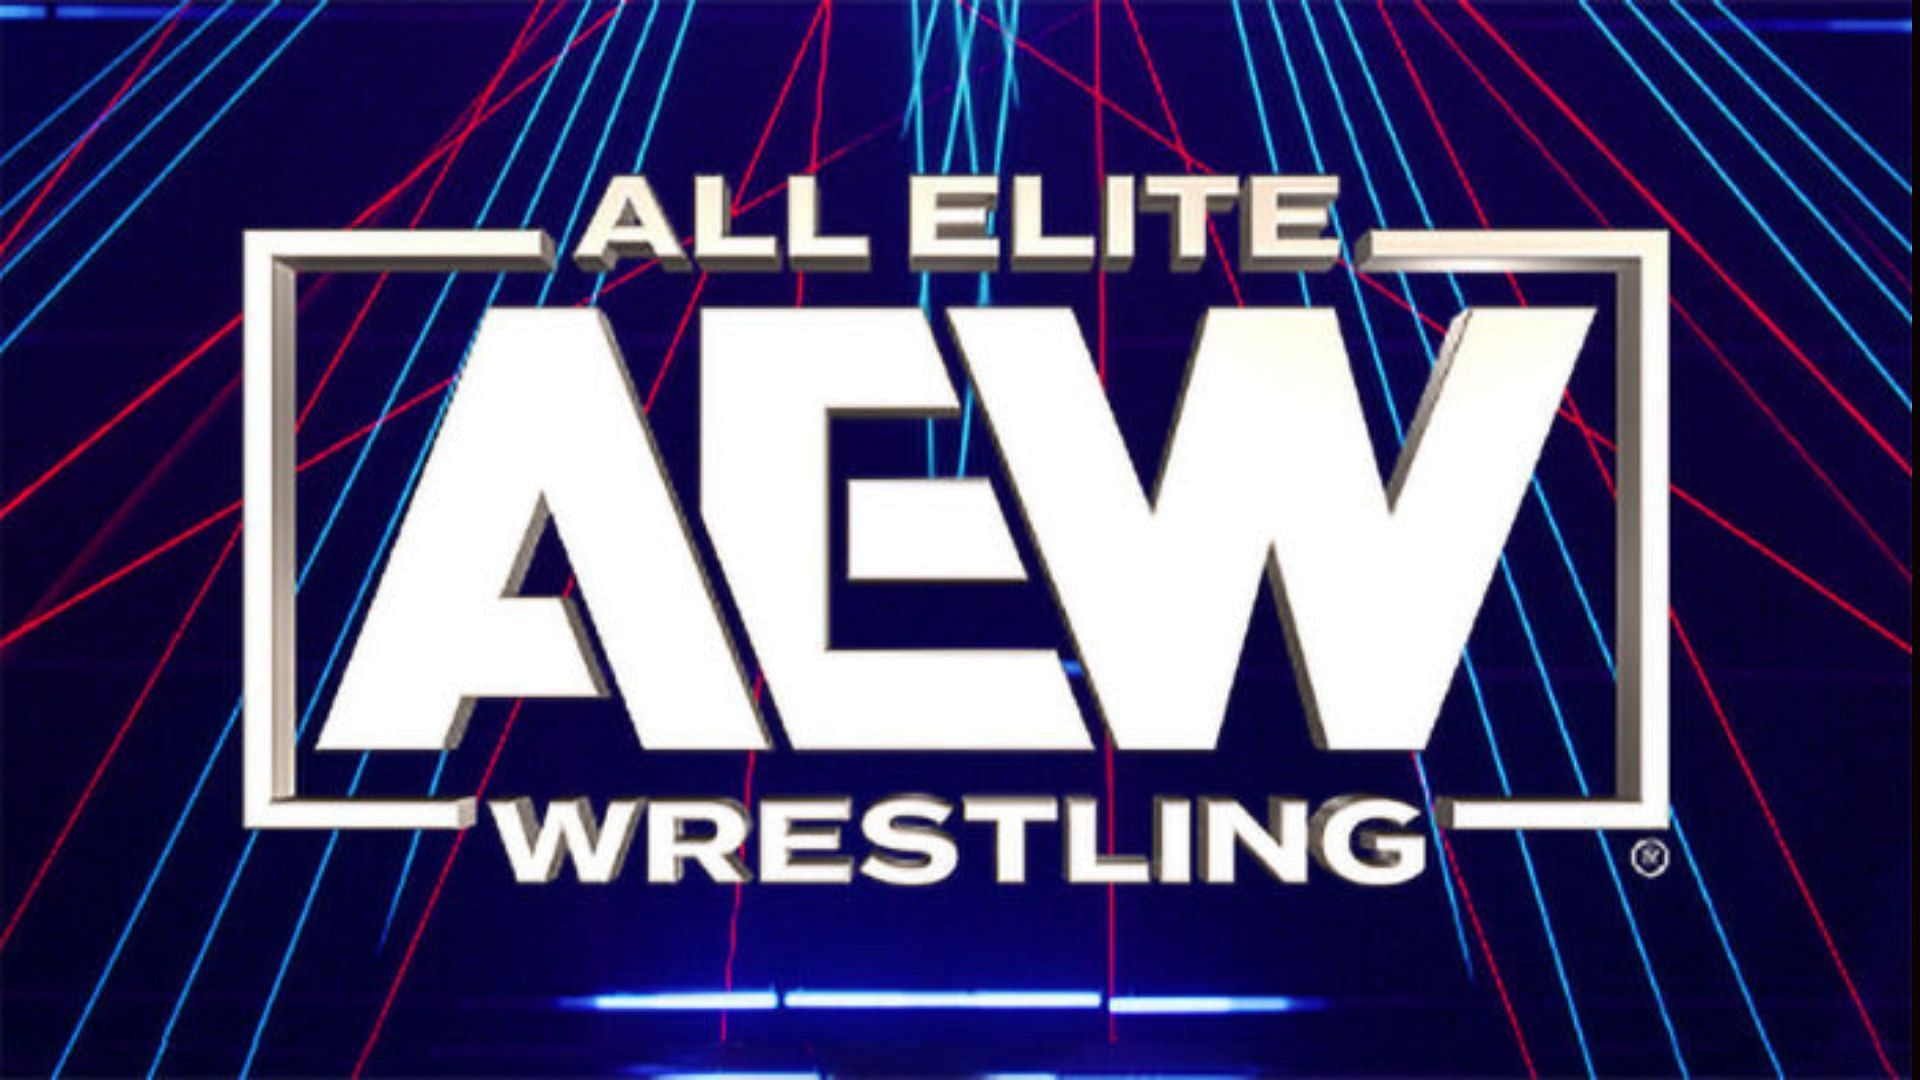 A major star recently spoke about his departure from AEW